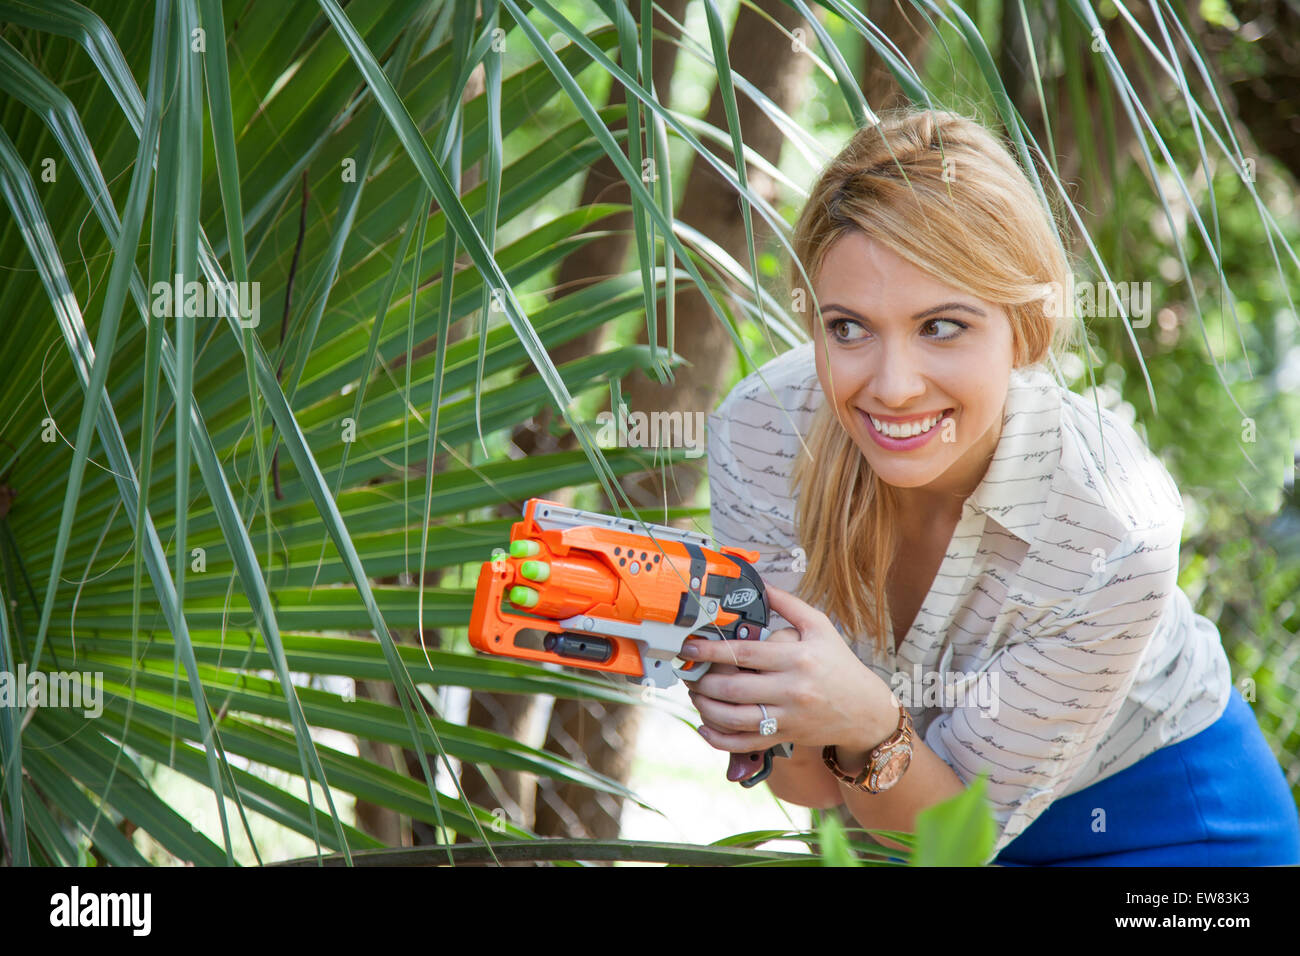 Young woman playing with nerf guns in park in Florida Stock Photo